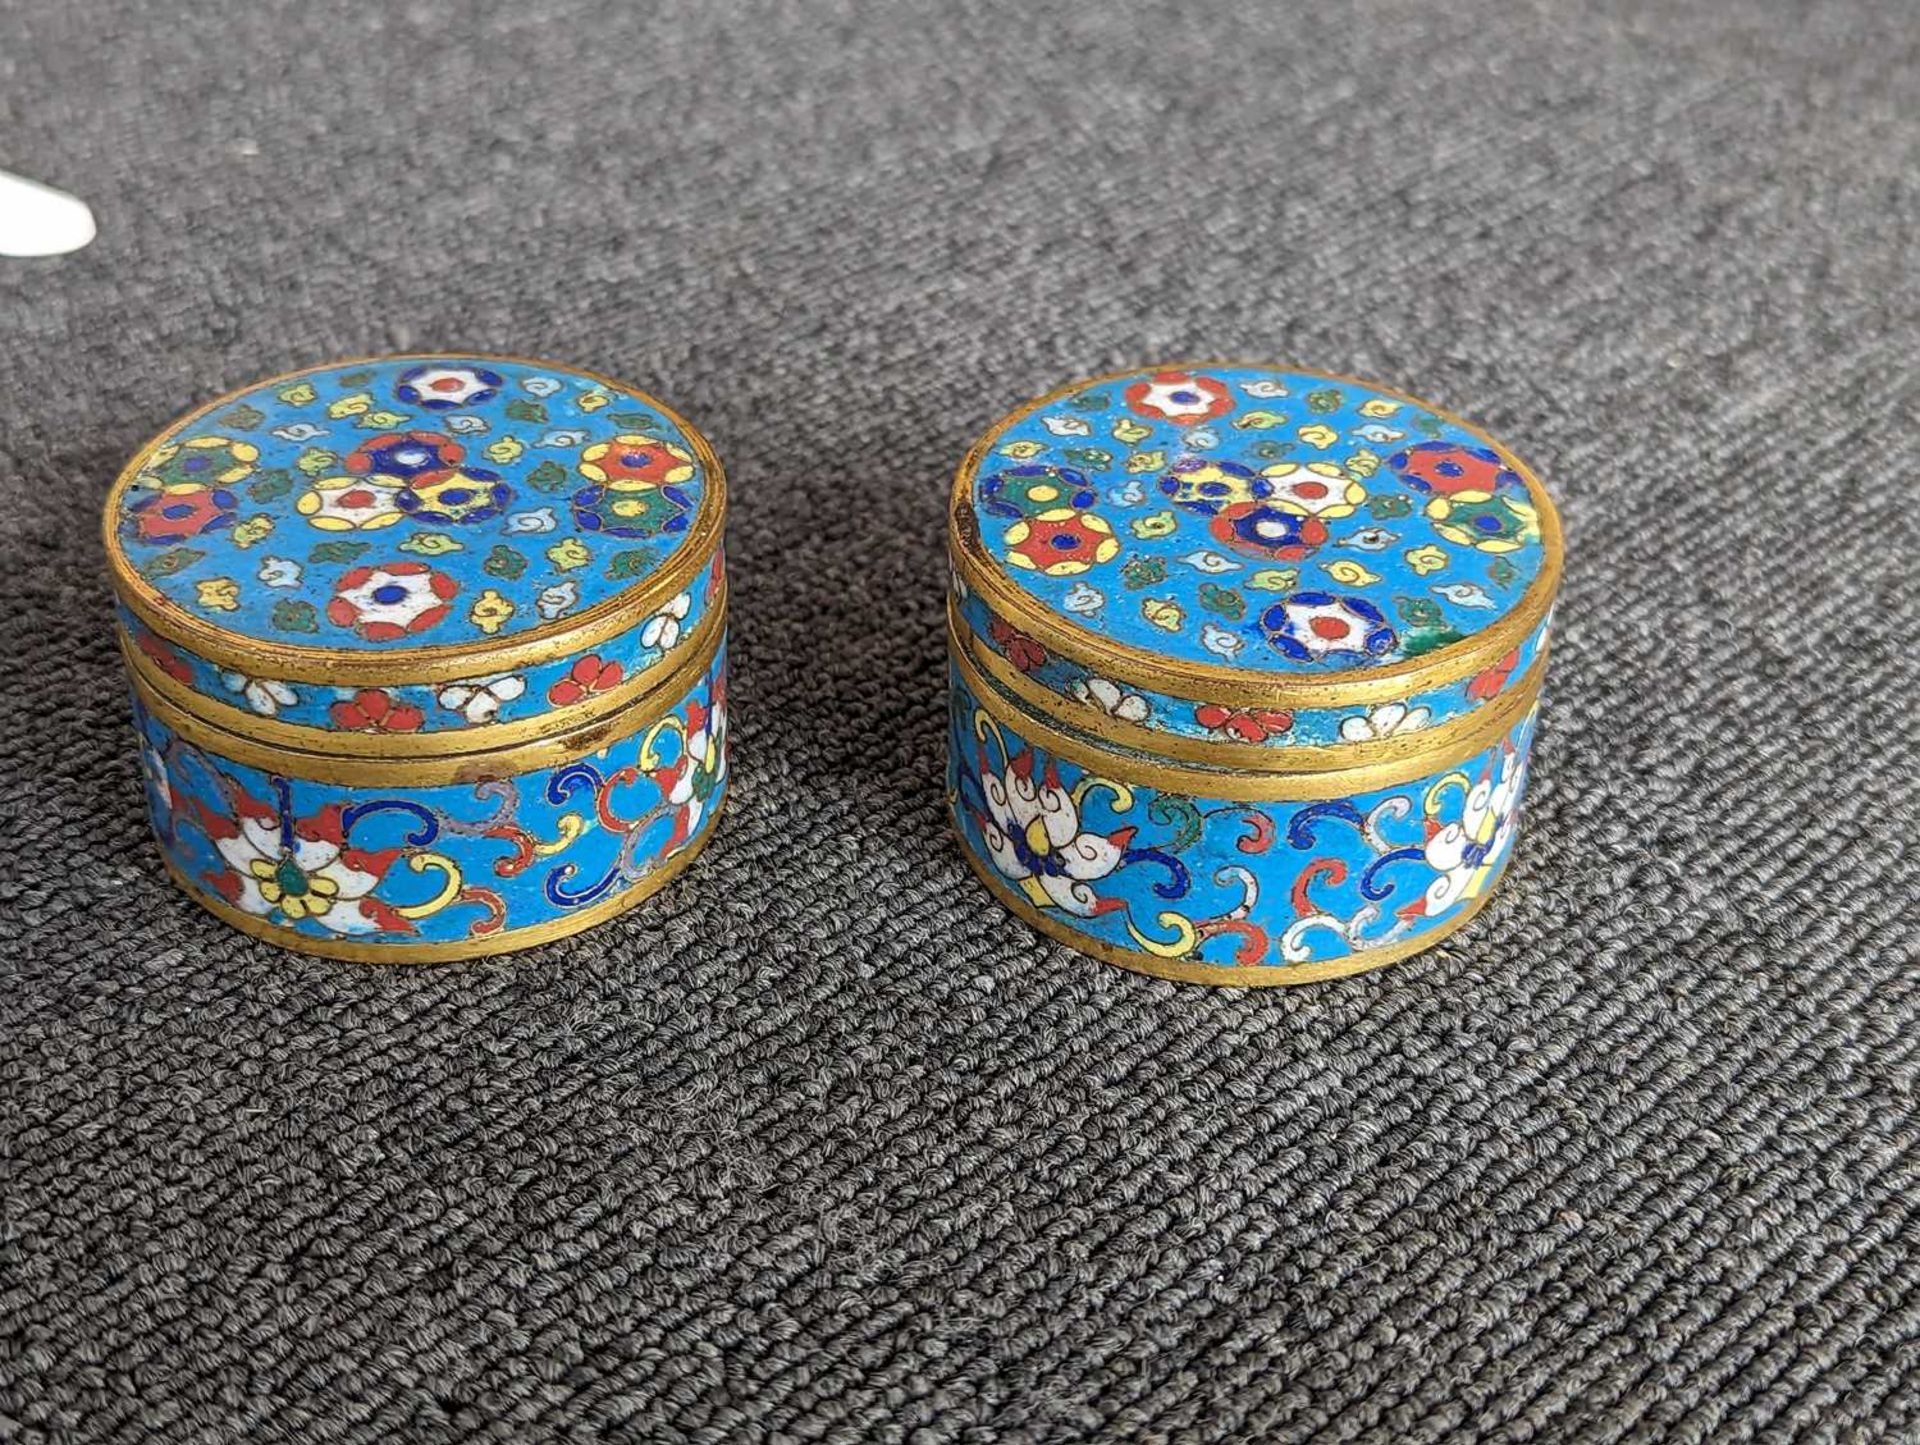 SET OF CLOISONNE BOXES - Image 9 of 15